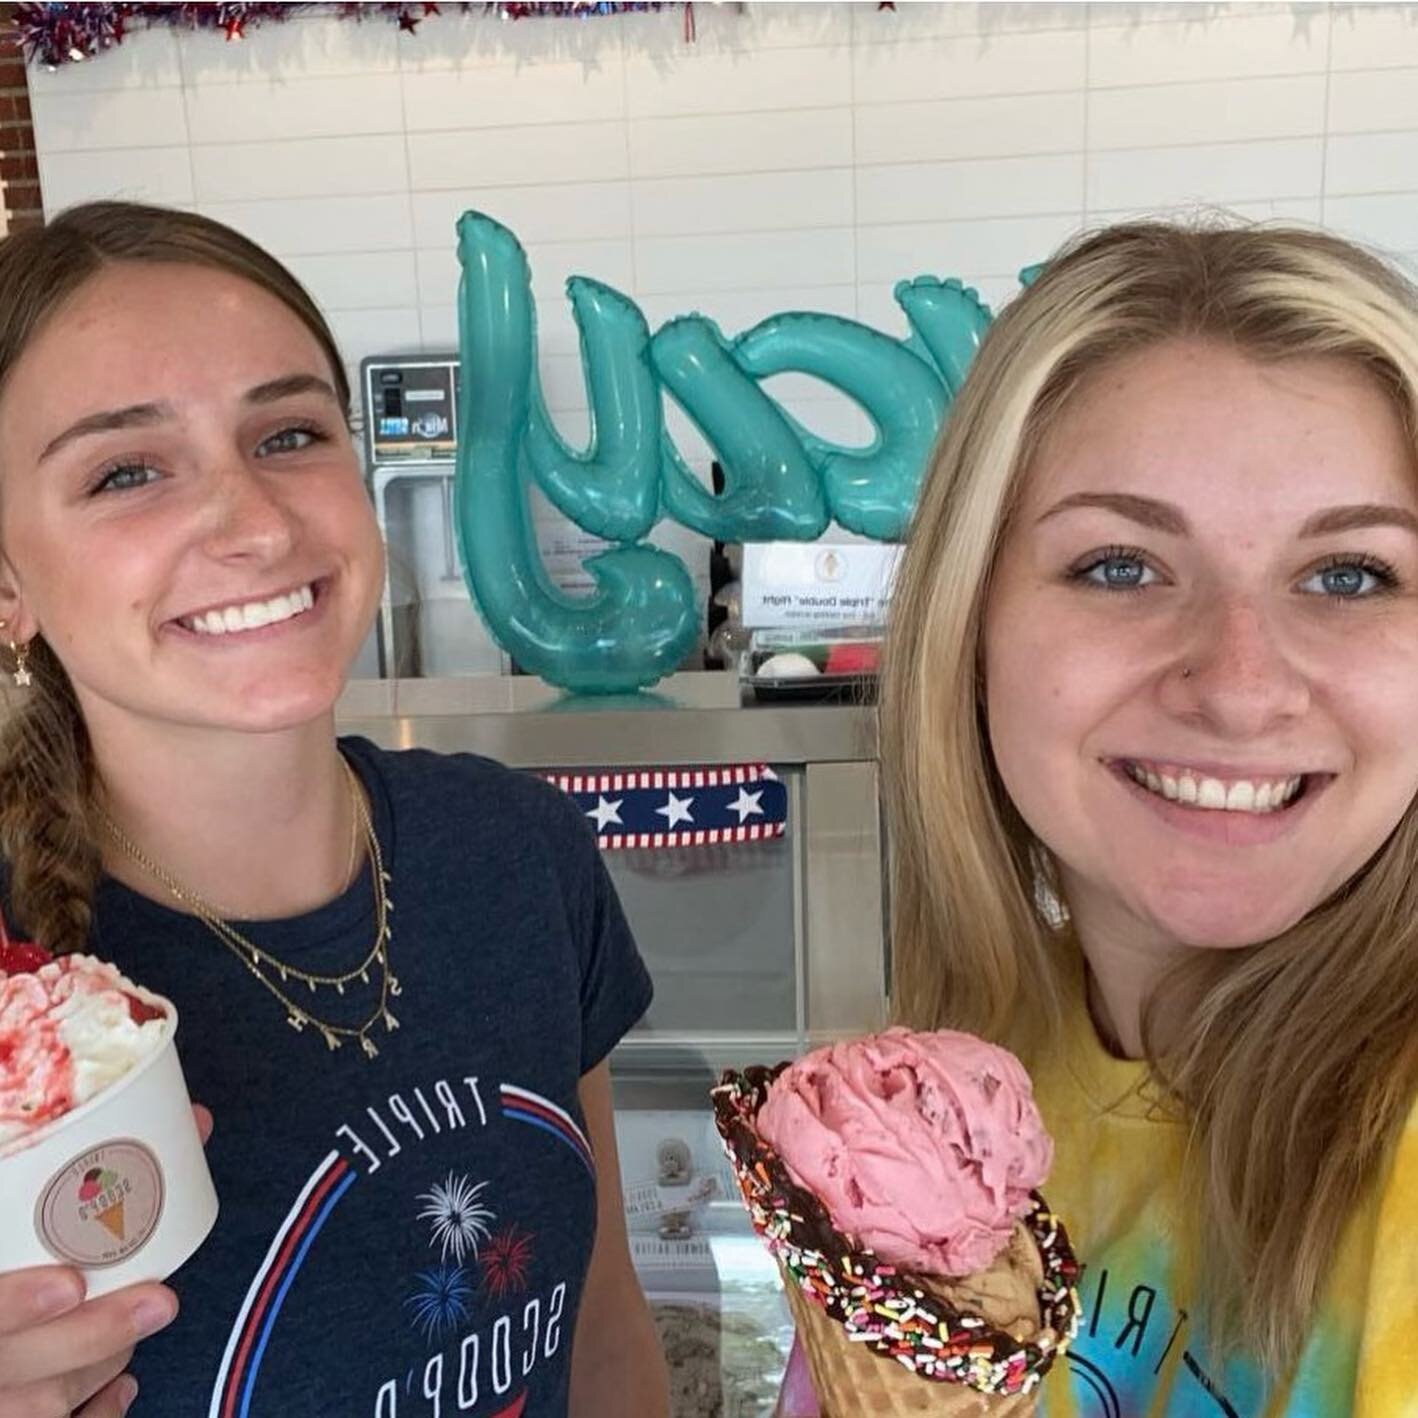 It&rsquo;s &ldquo;NATIONAL ICE CREAM DAY a d the weather is perfect! Grab a friend and come on over. Triple Scoop&rsquo;d ice cream 801 Devon Park Ridge!